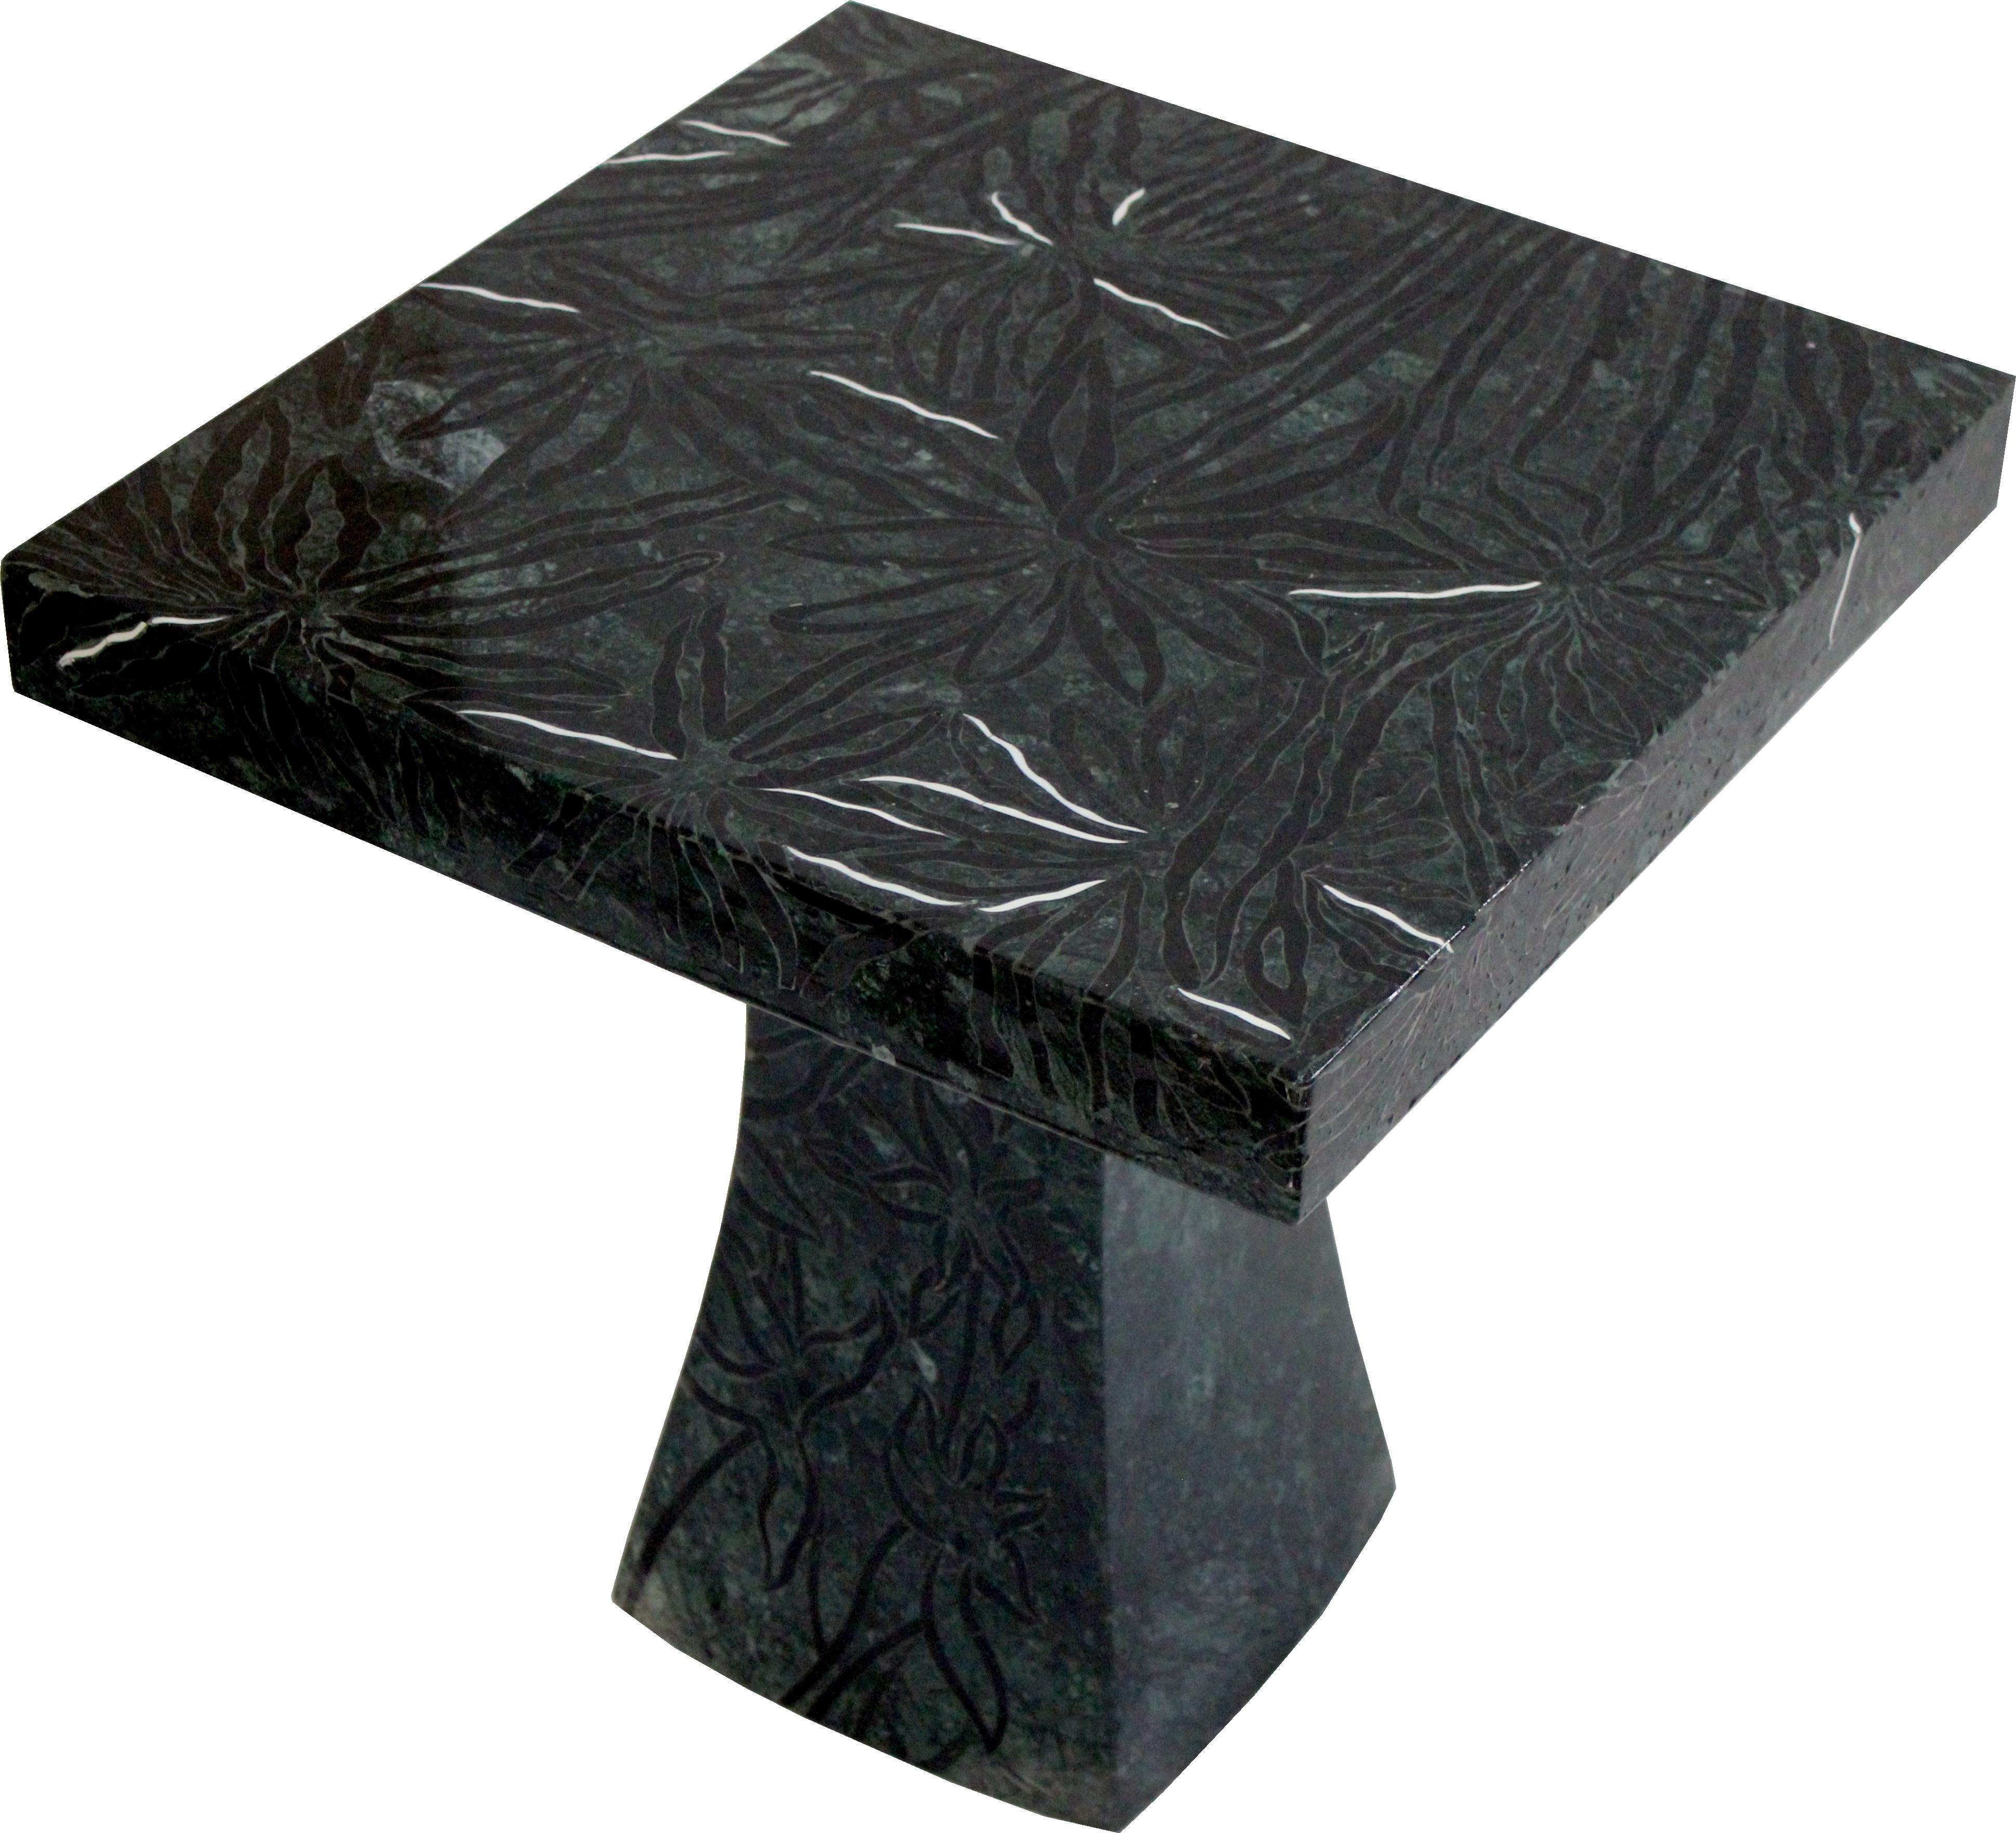 Other Palms Table in Green Marble Handcrafted in India by Stephanie Odegard For Sale